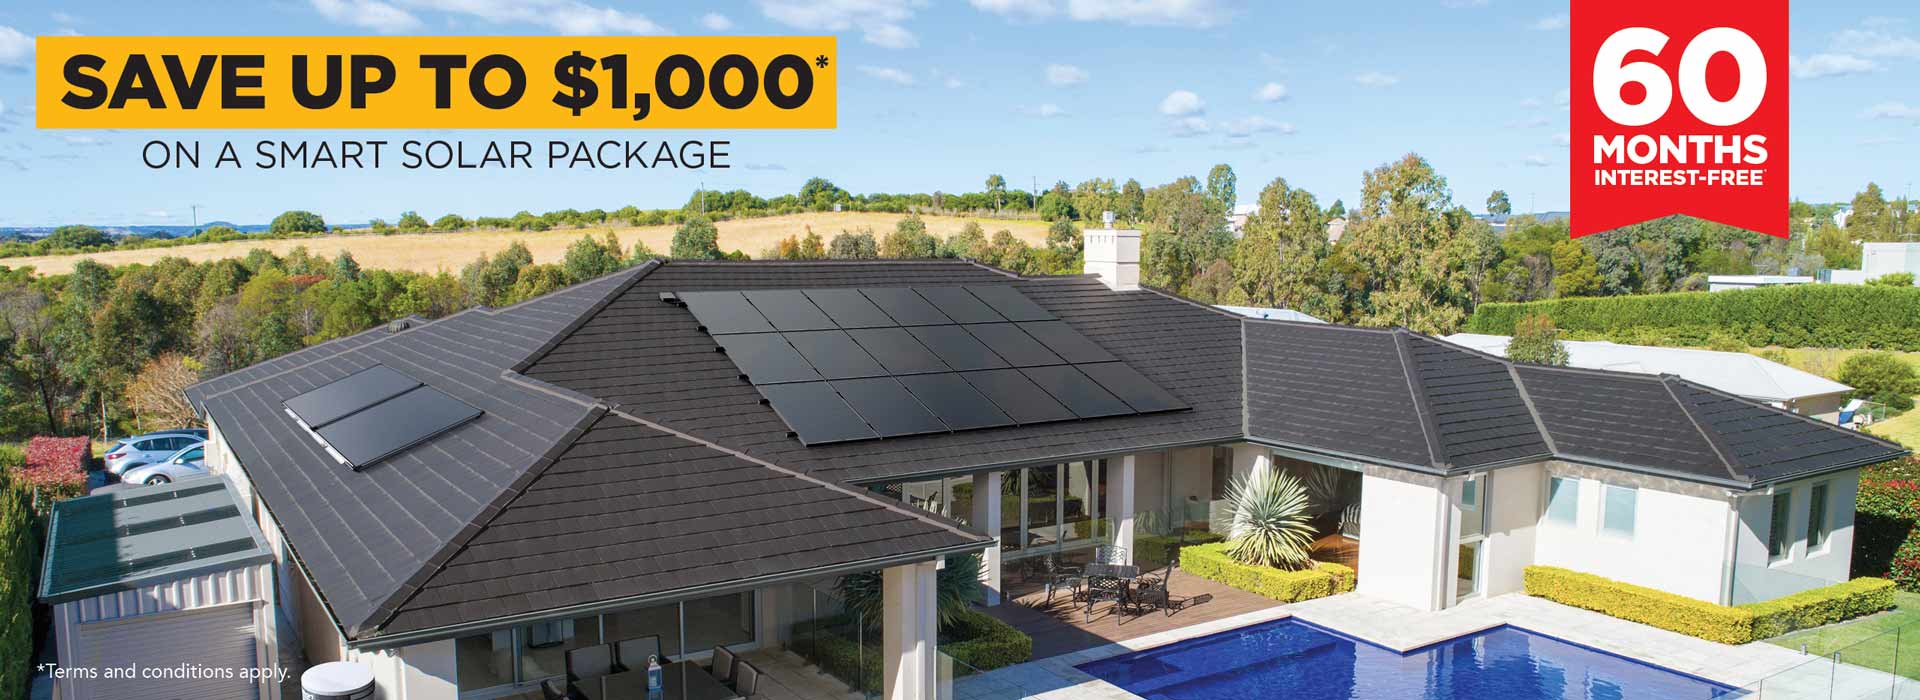 Save up to $1000 on a smart solar package from Solahart Sydney, includes solar power systems and solar hot water systems installed in Sydney